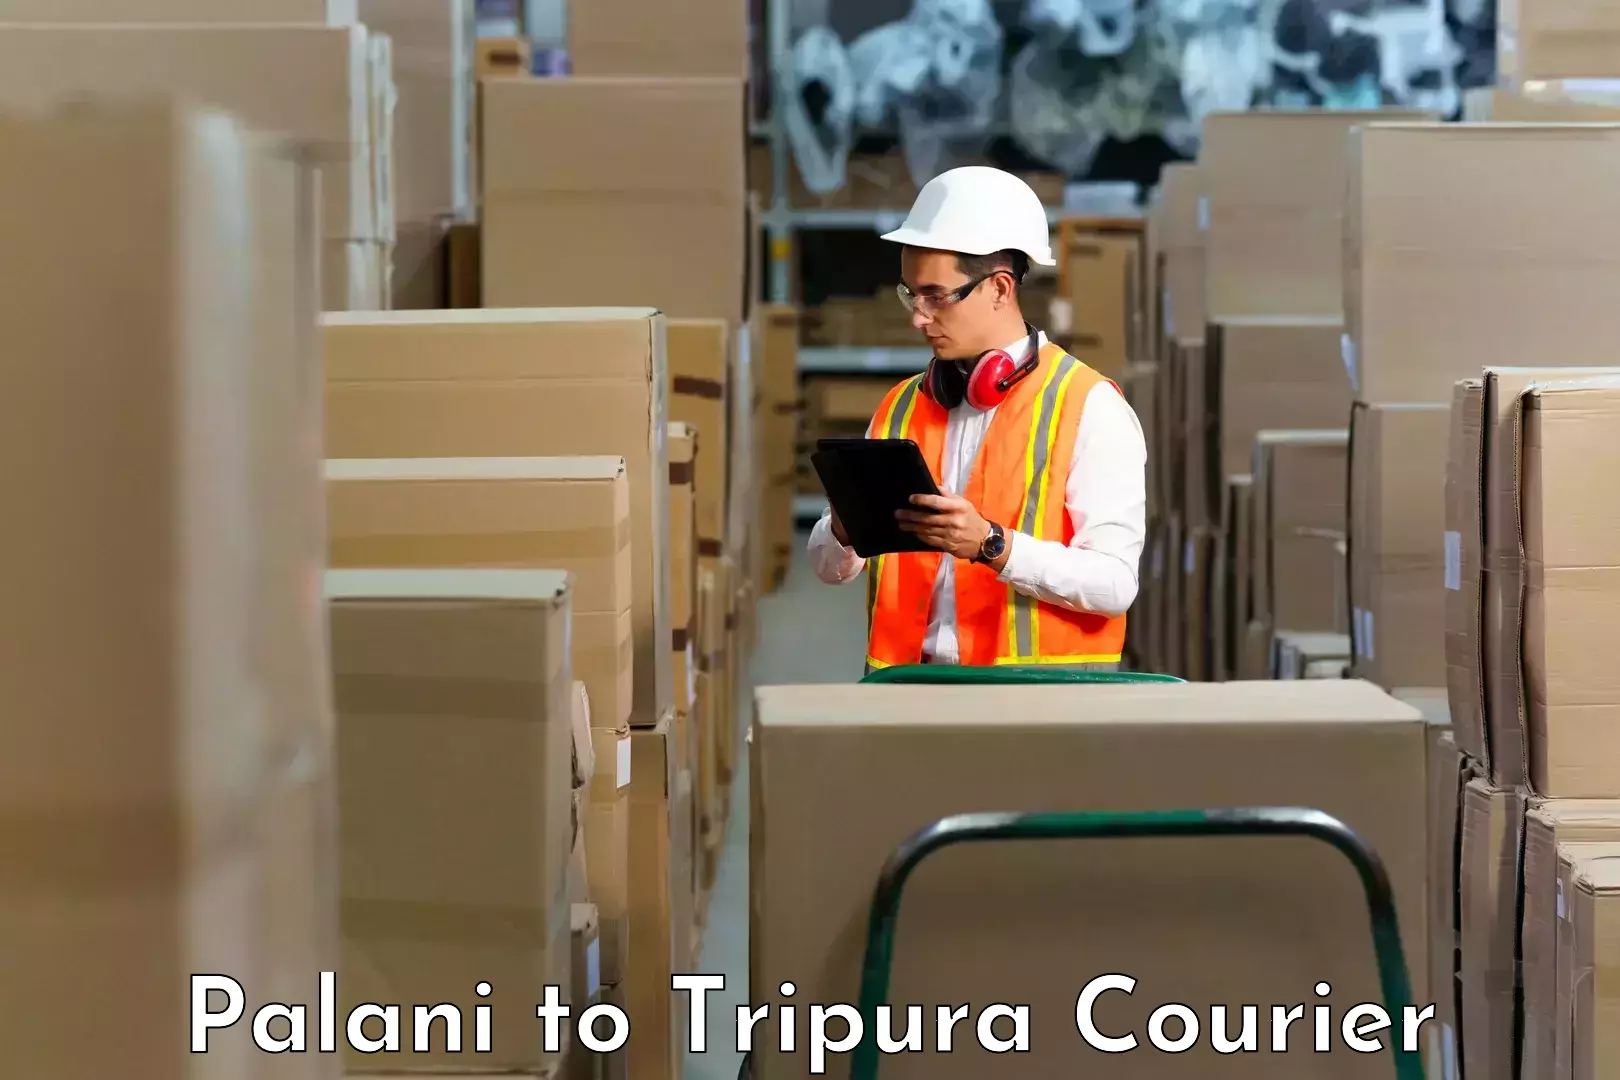 Next-generation courier services Palani to Udaipur Tripura